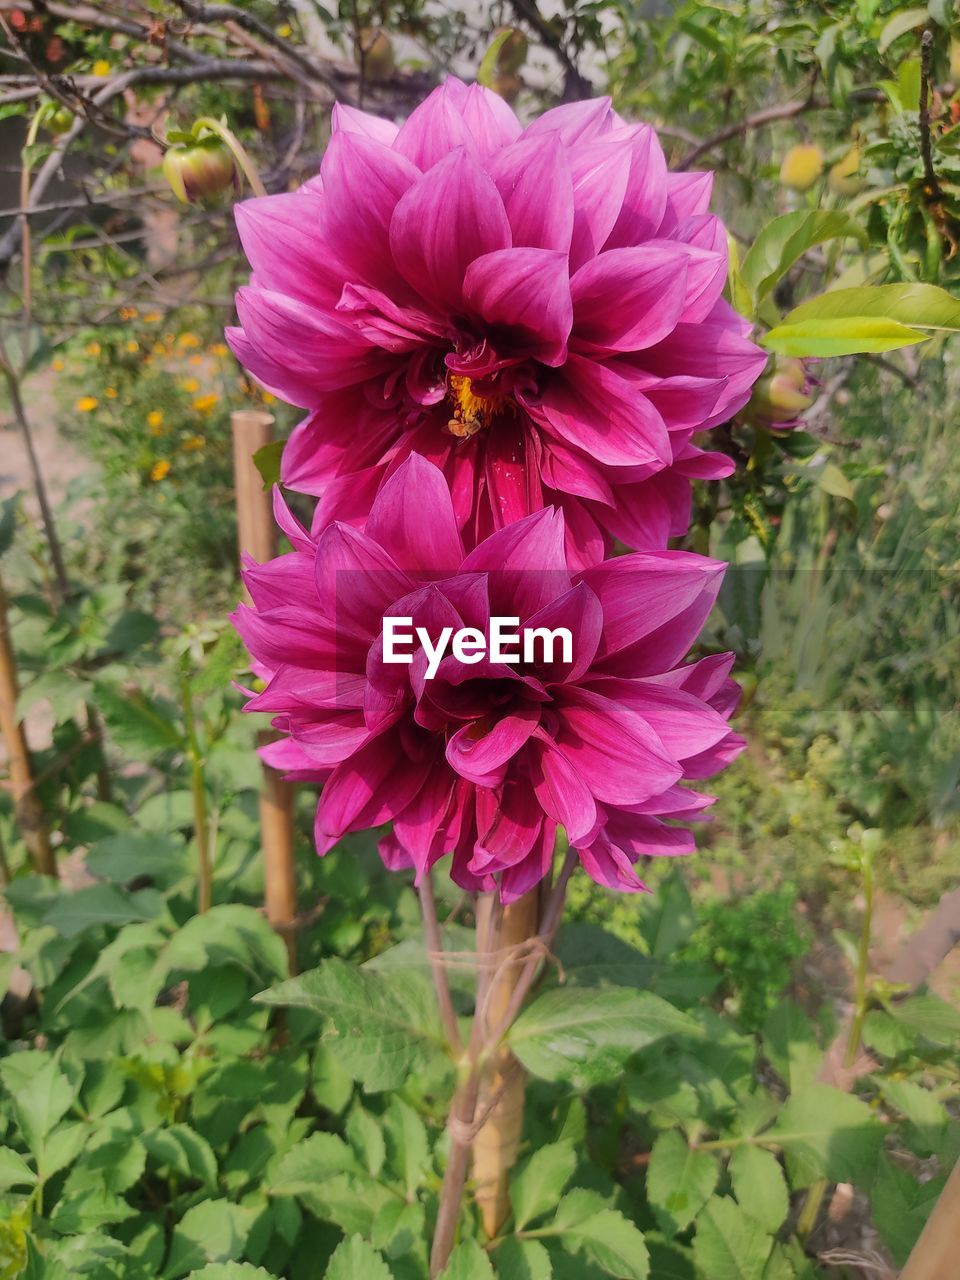 plant, flower, flowering plant, freshness, beauty in nature, pink, petal, growth, fragility, flower head, close-up, nature, inflorescence, plant part, leaf, no people, green, day, dahlia, high angle view, outdoors, focus on foreground, pollen